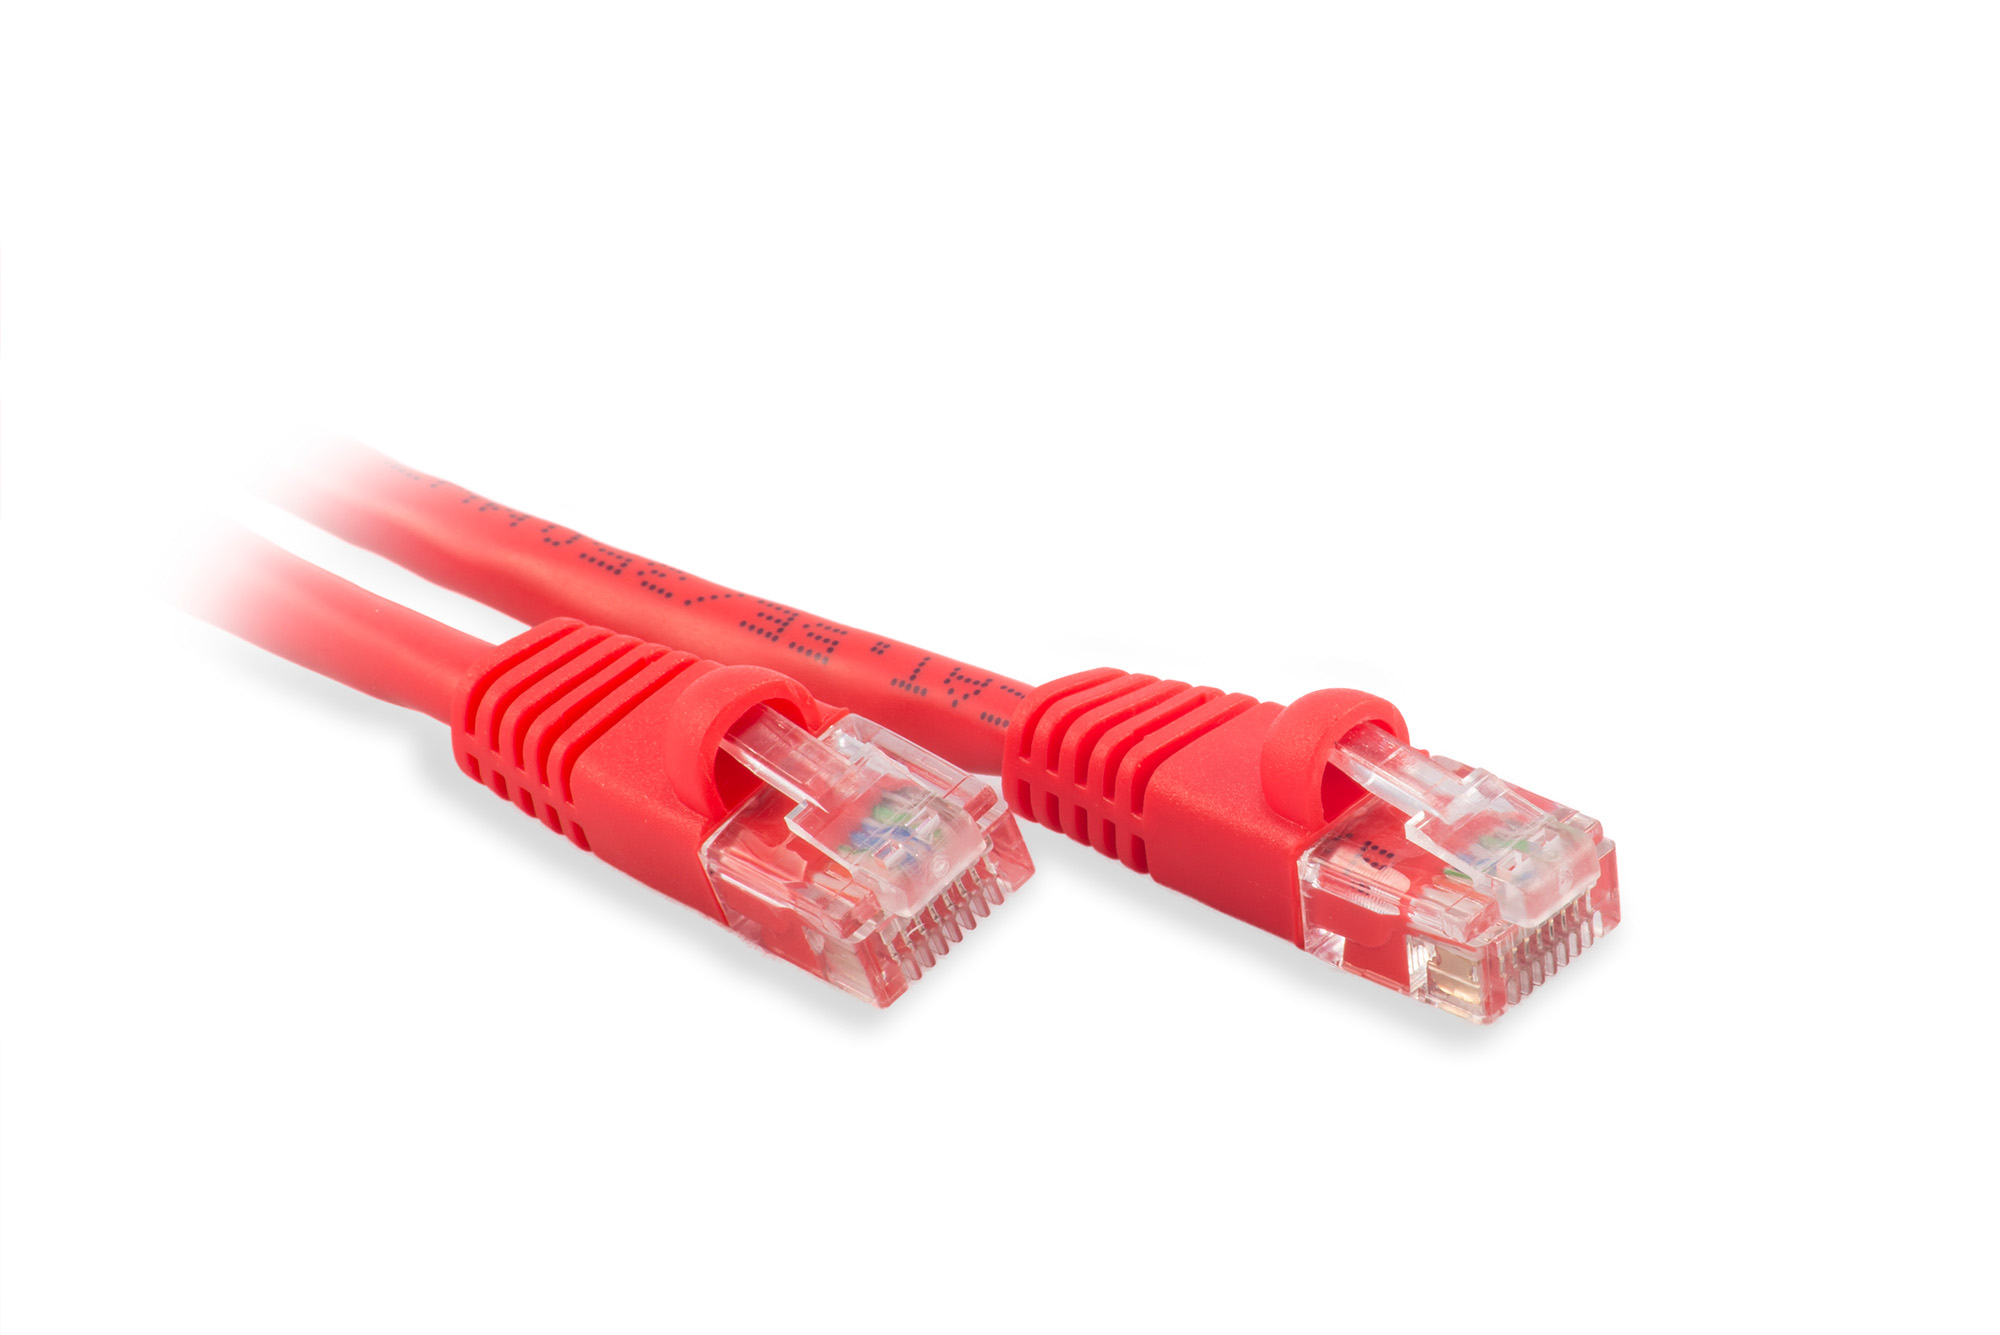 30ft Cat6 Ethernet Patch Cable - Red Color - Snagless Boot